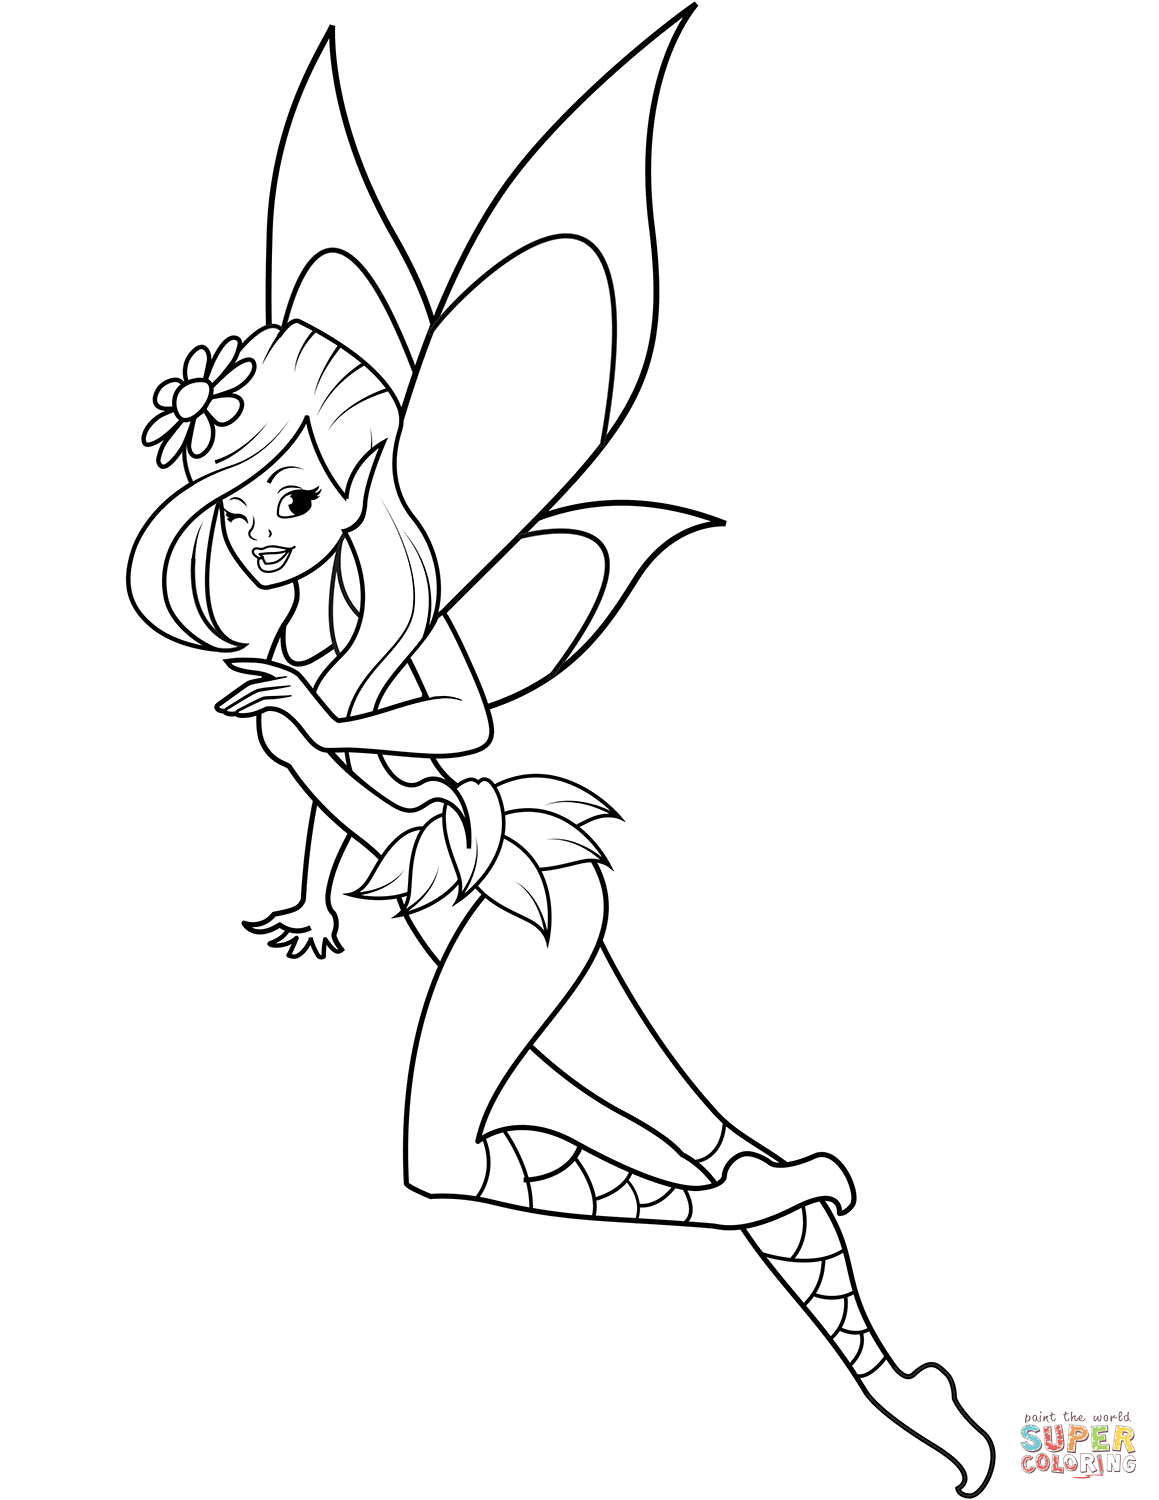 Free Coloring Pages Of Fairies Fairy Coloring Pages Free Coloring Pages